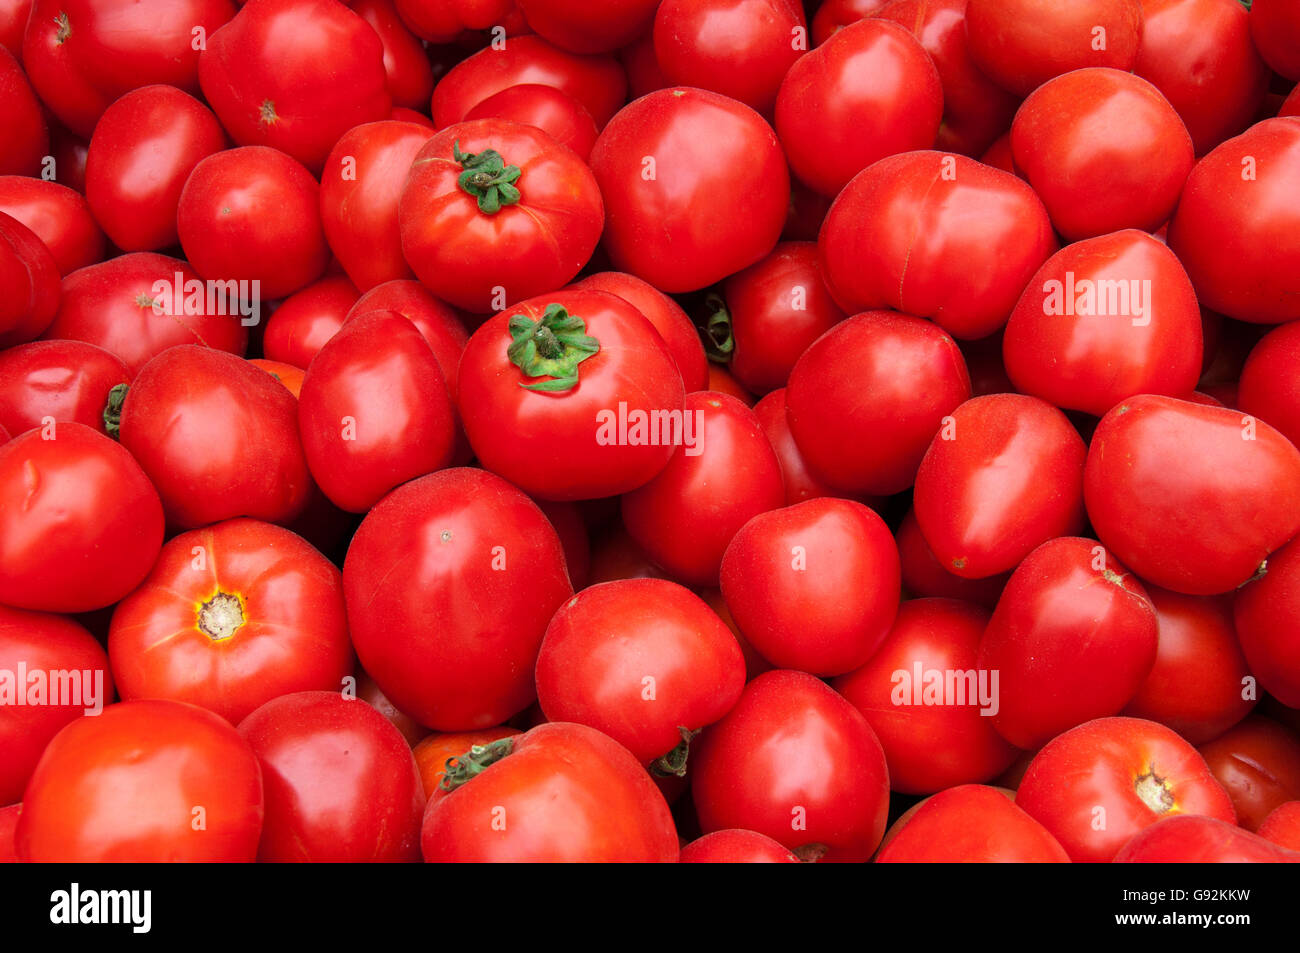 Group of Red Tomato Texture Stock Photo